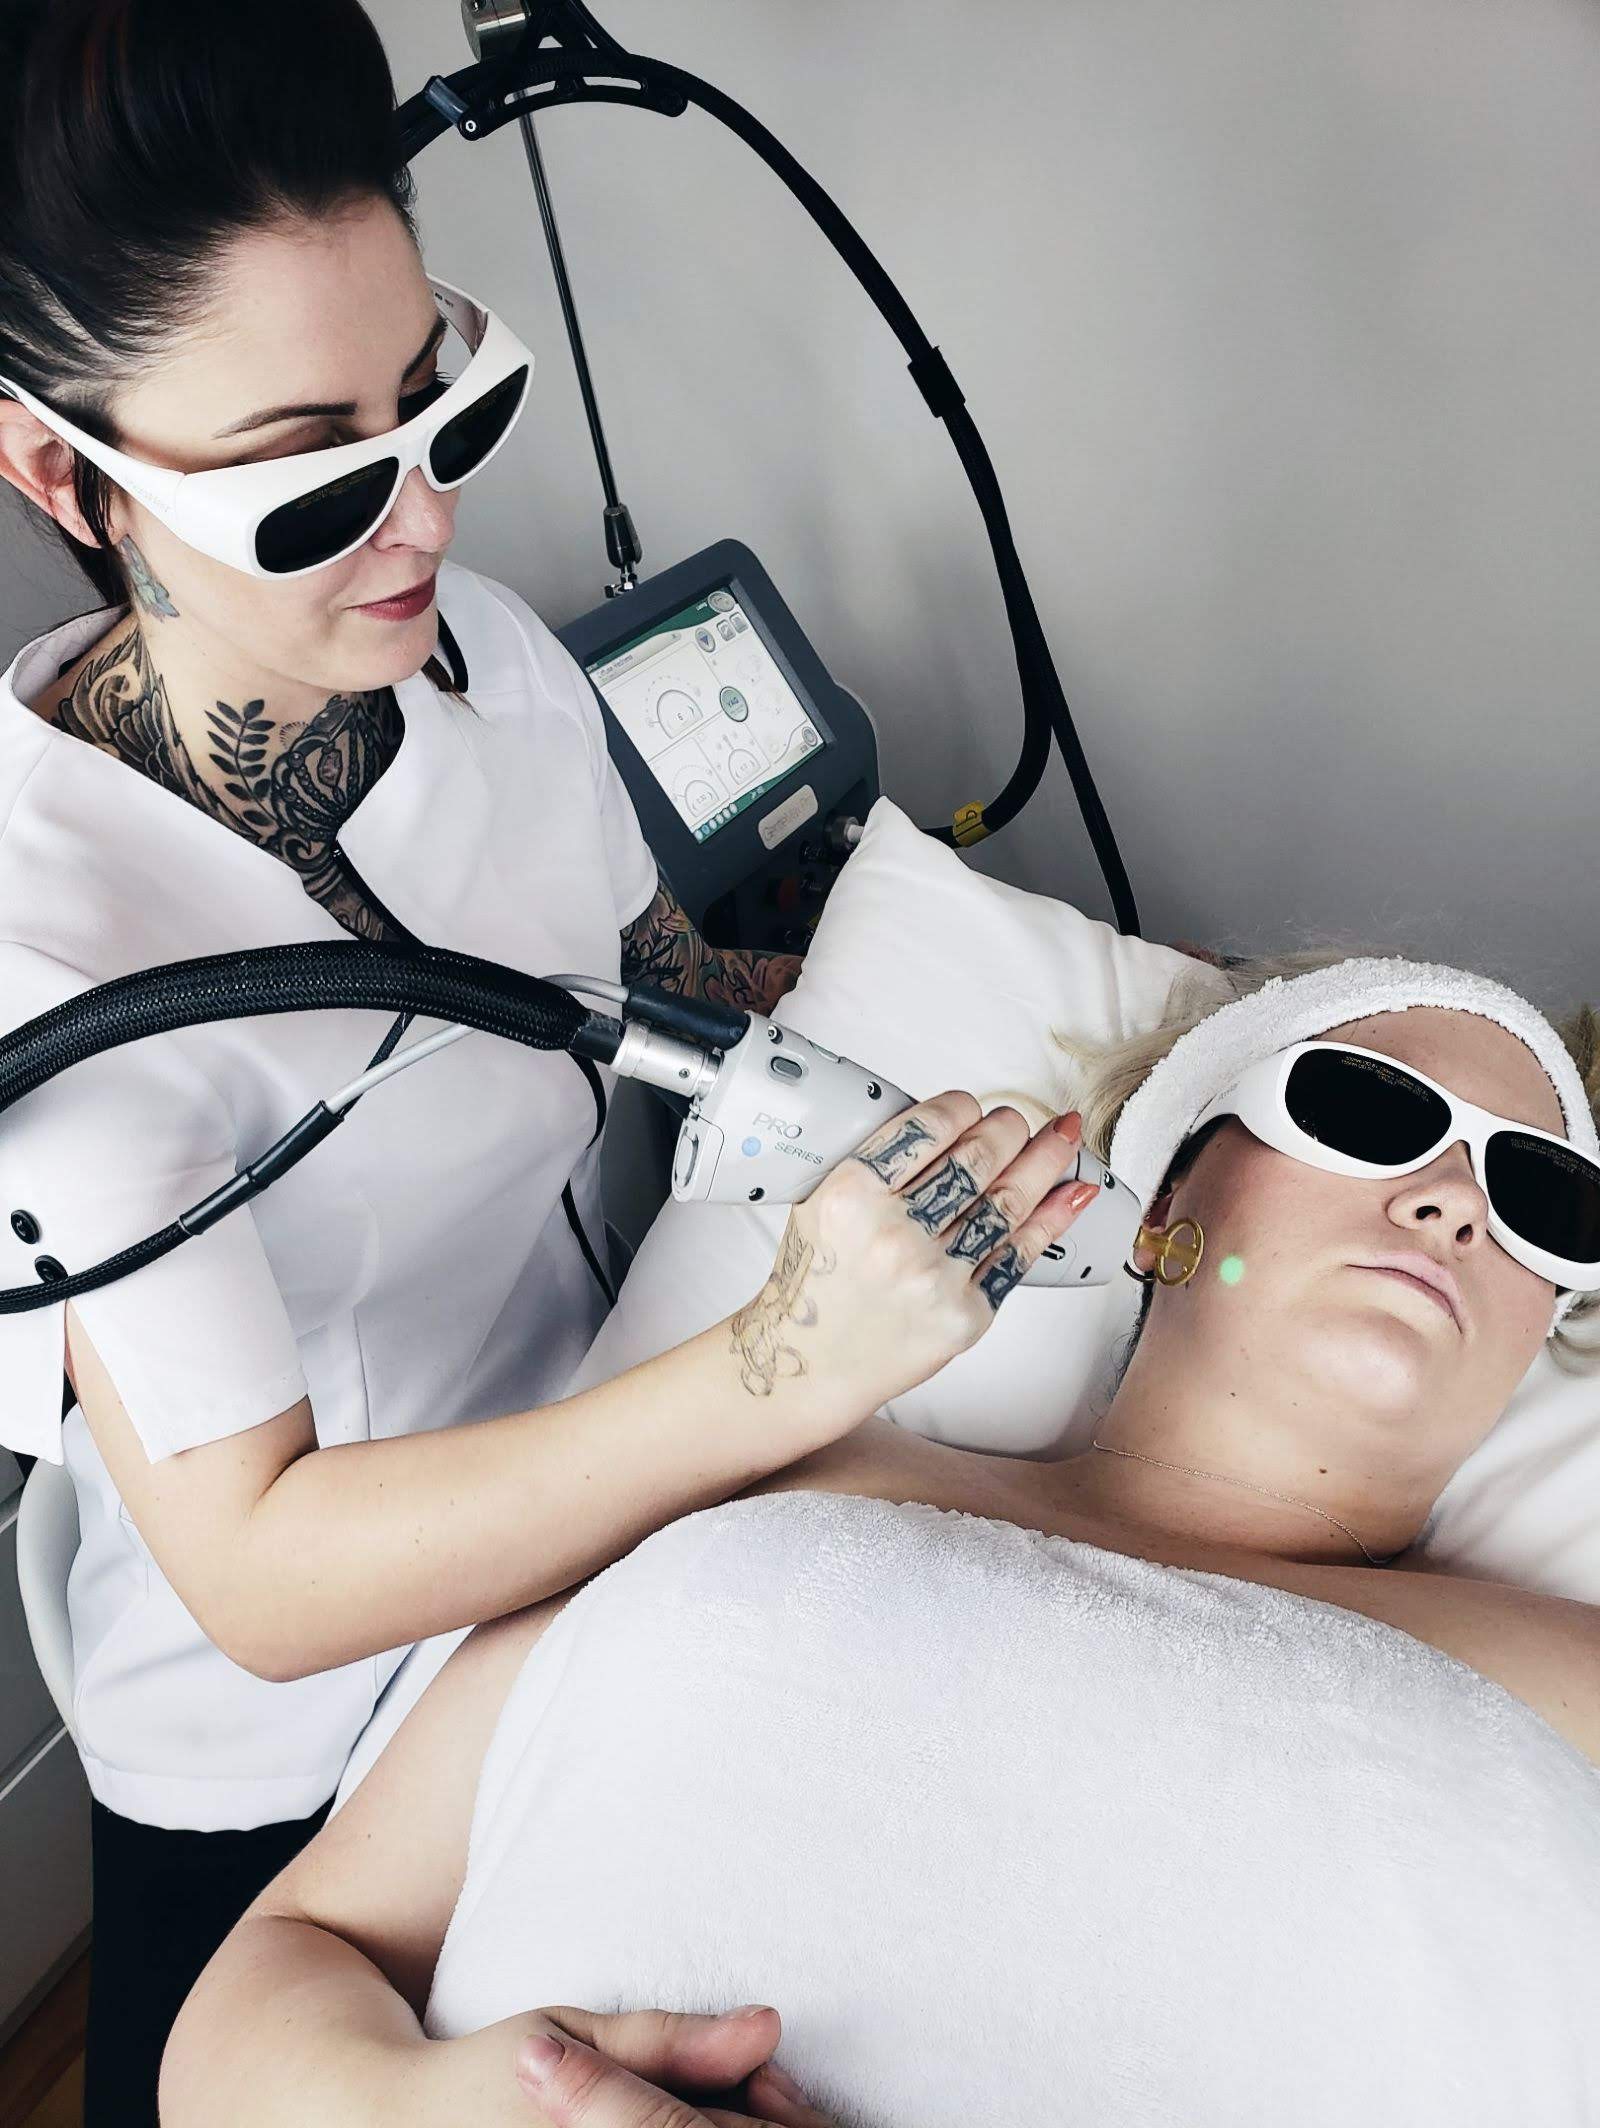 How Does Laser Hair Removal Work